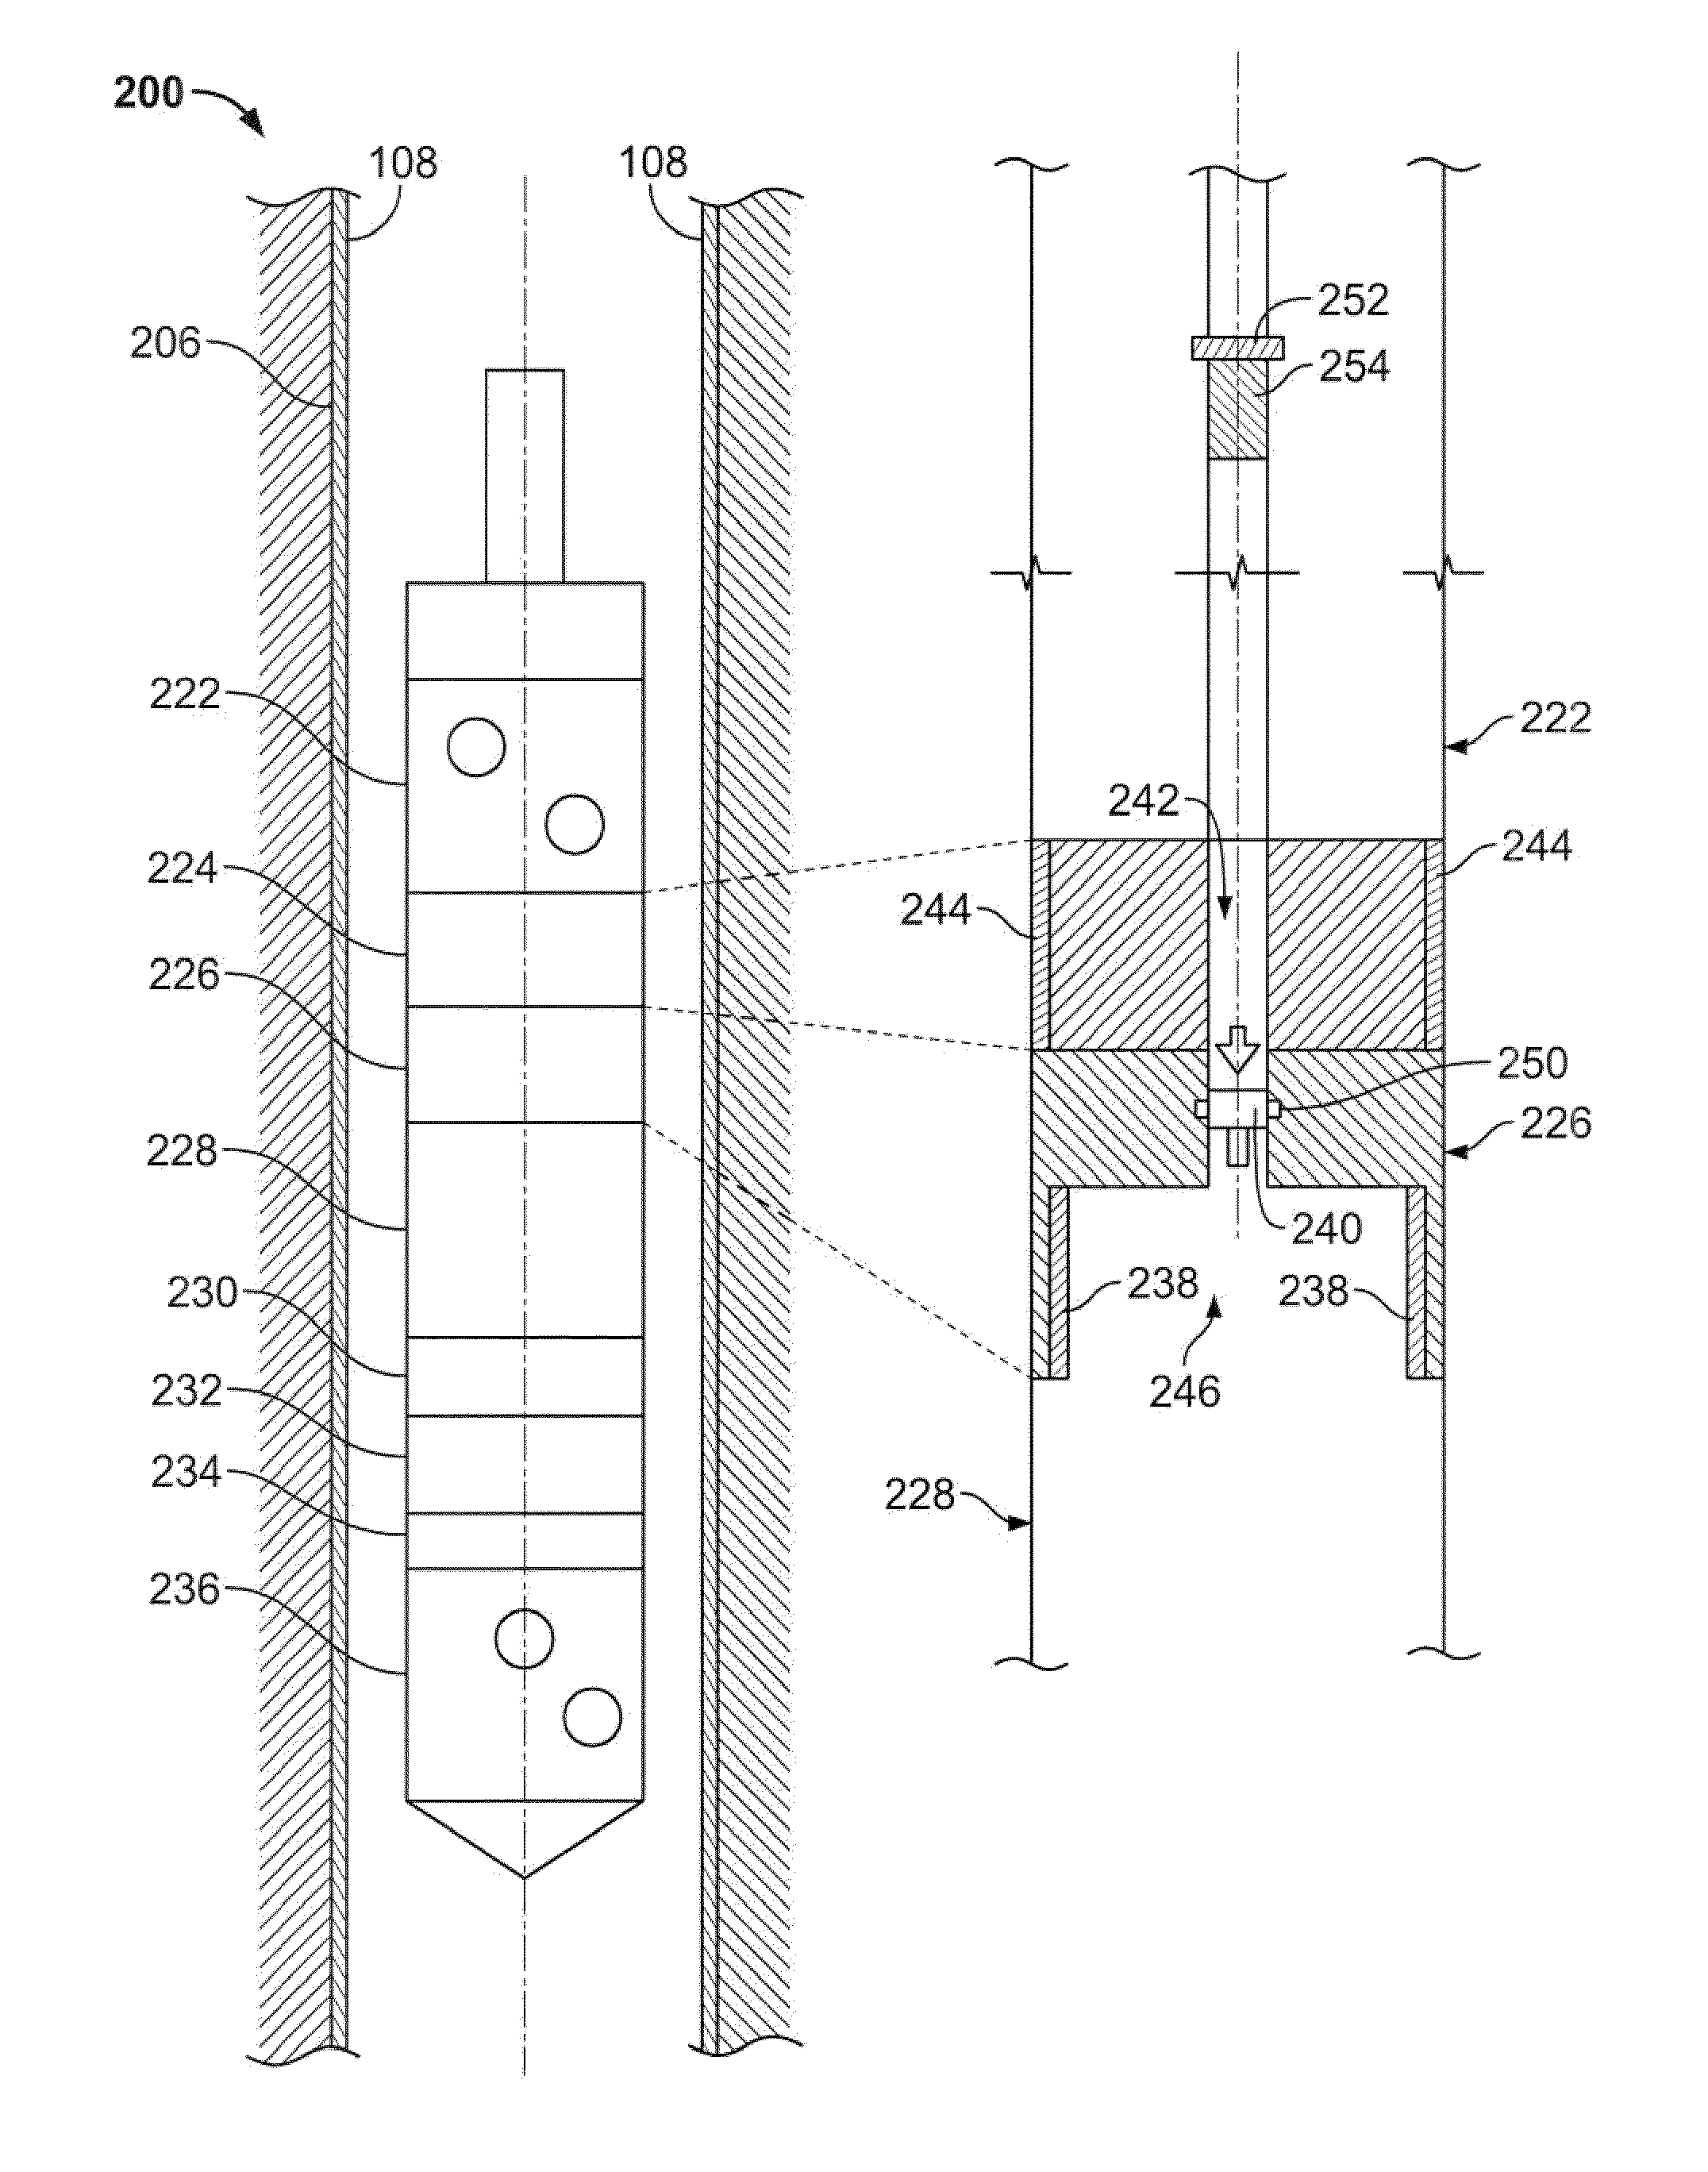 Managing Pressurized Fluid in a Downhole Tool